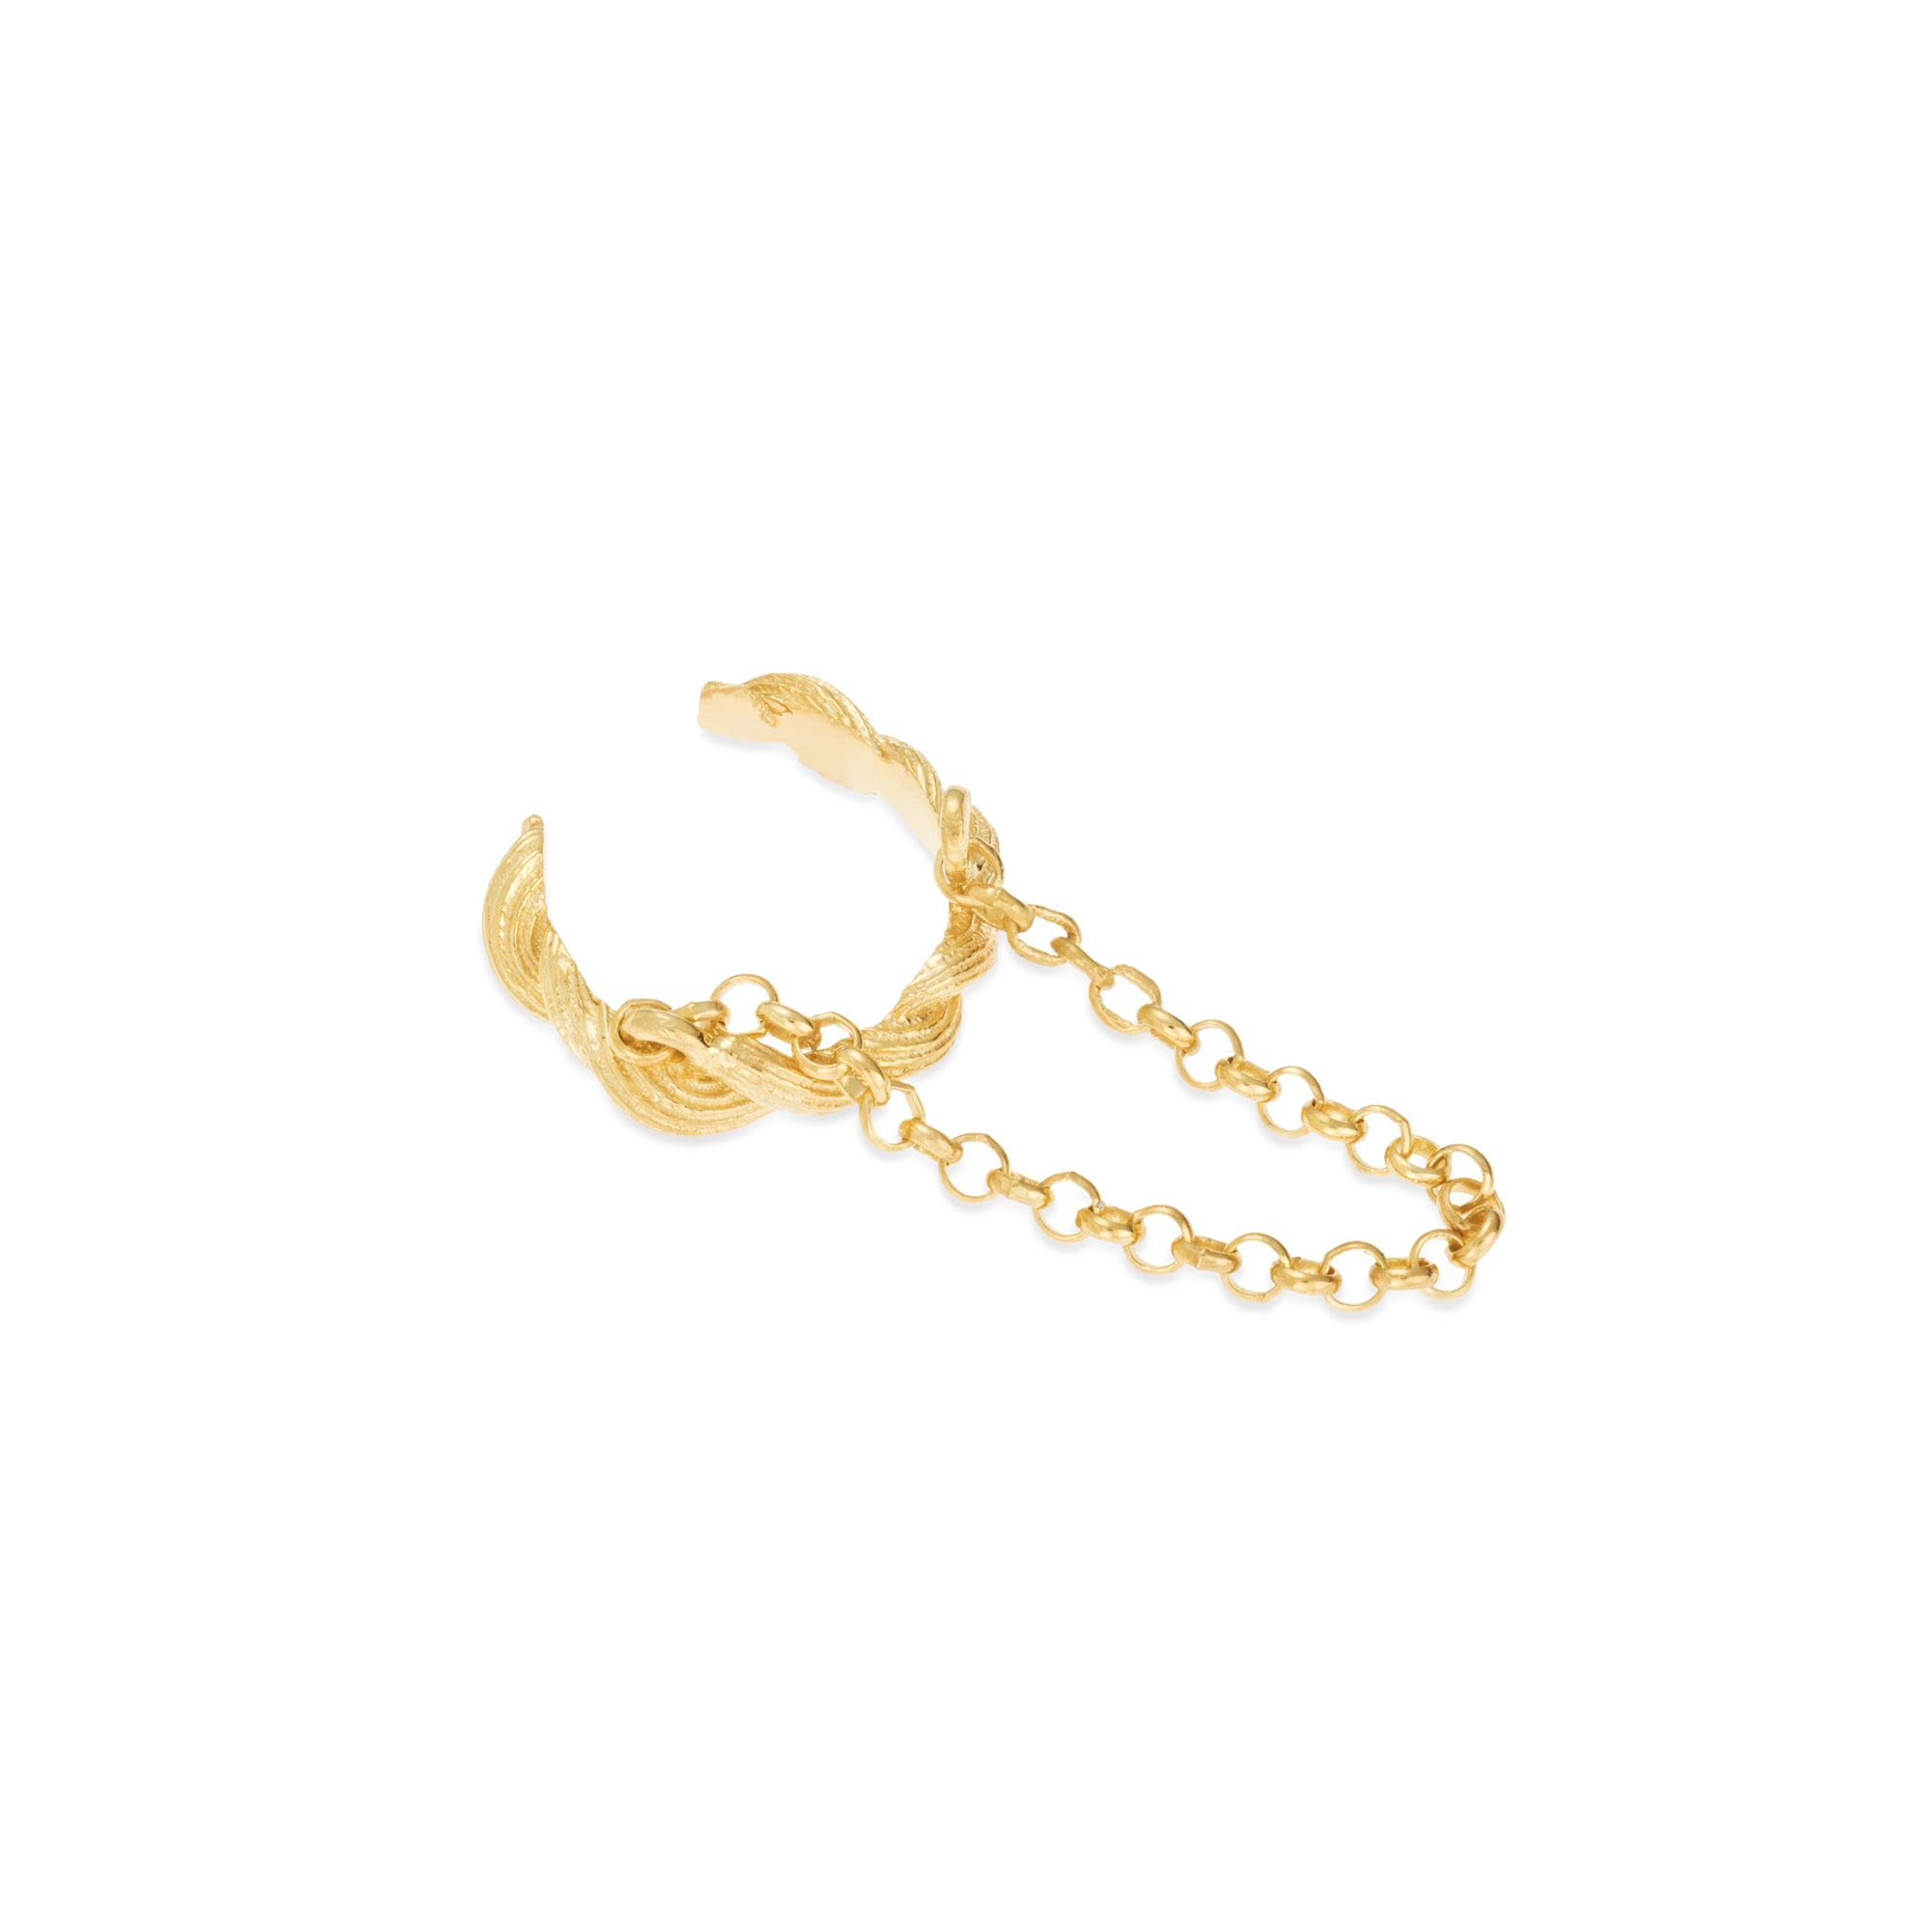 Braided Roots Gold Cuff